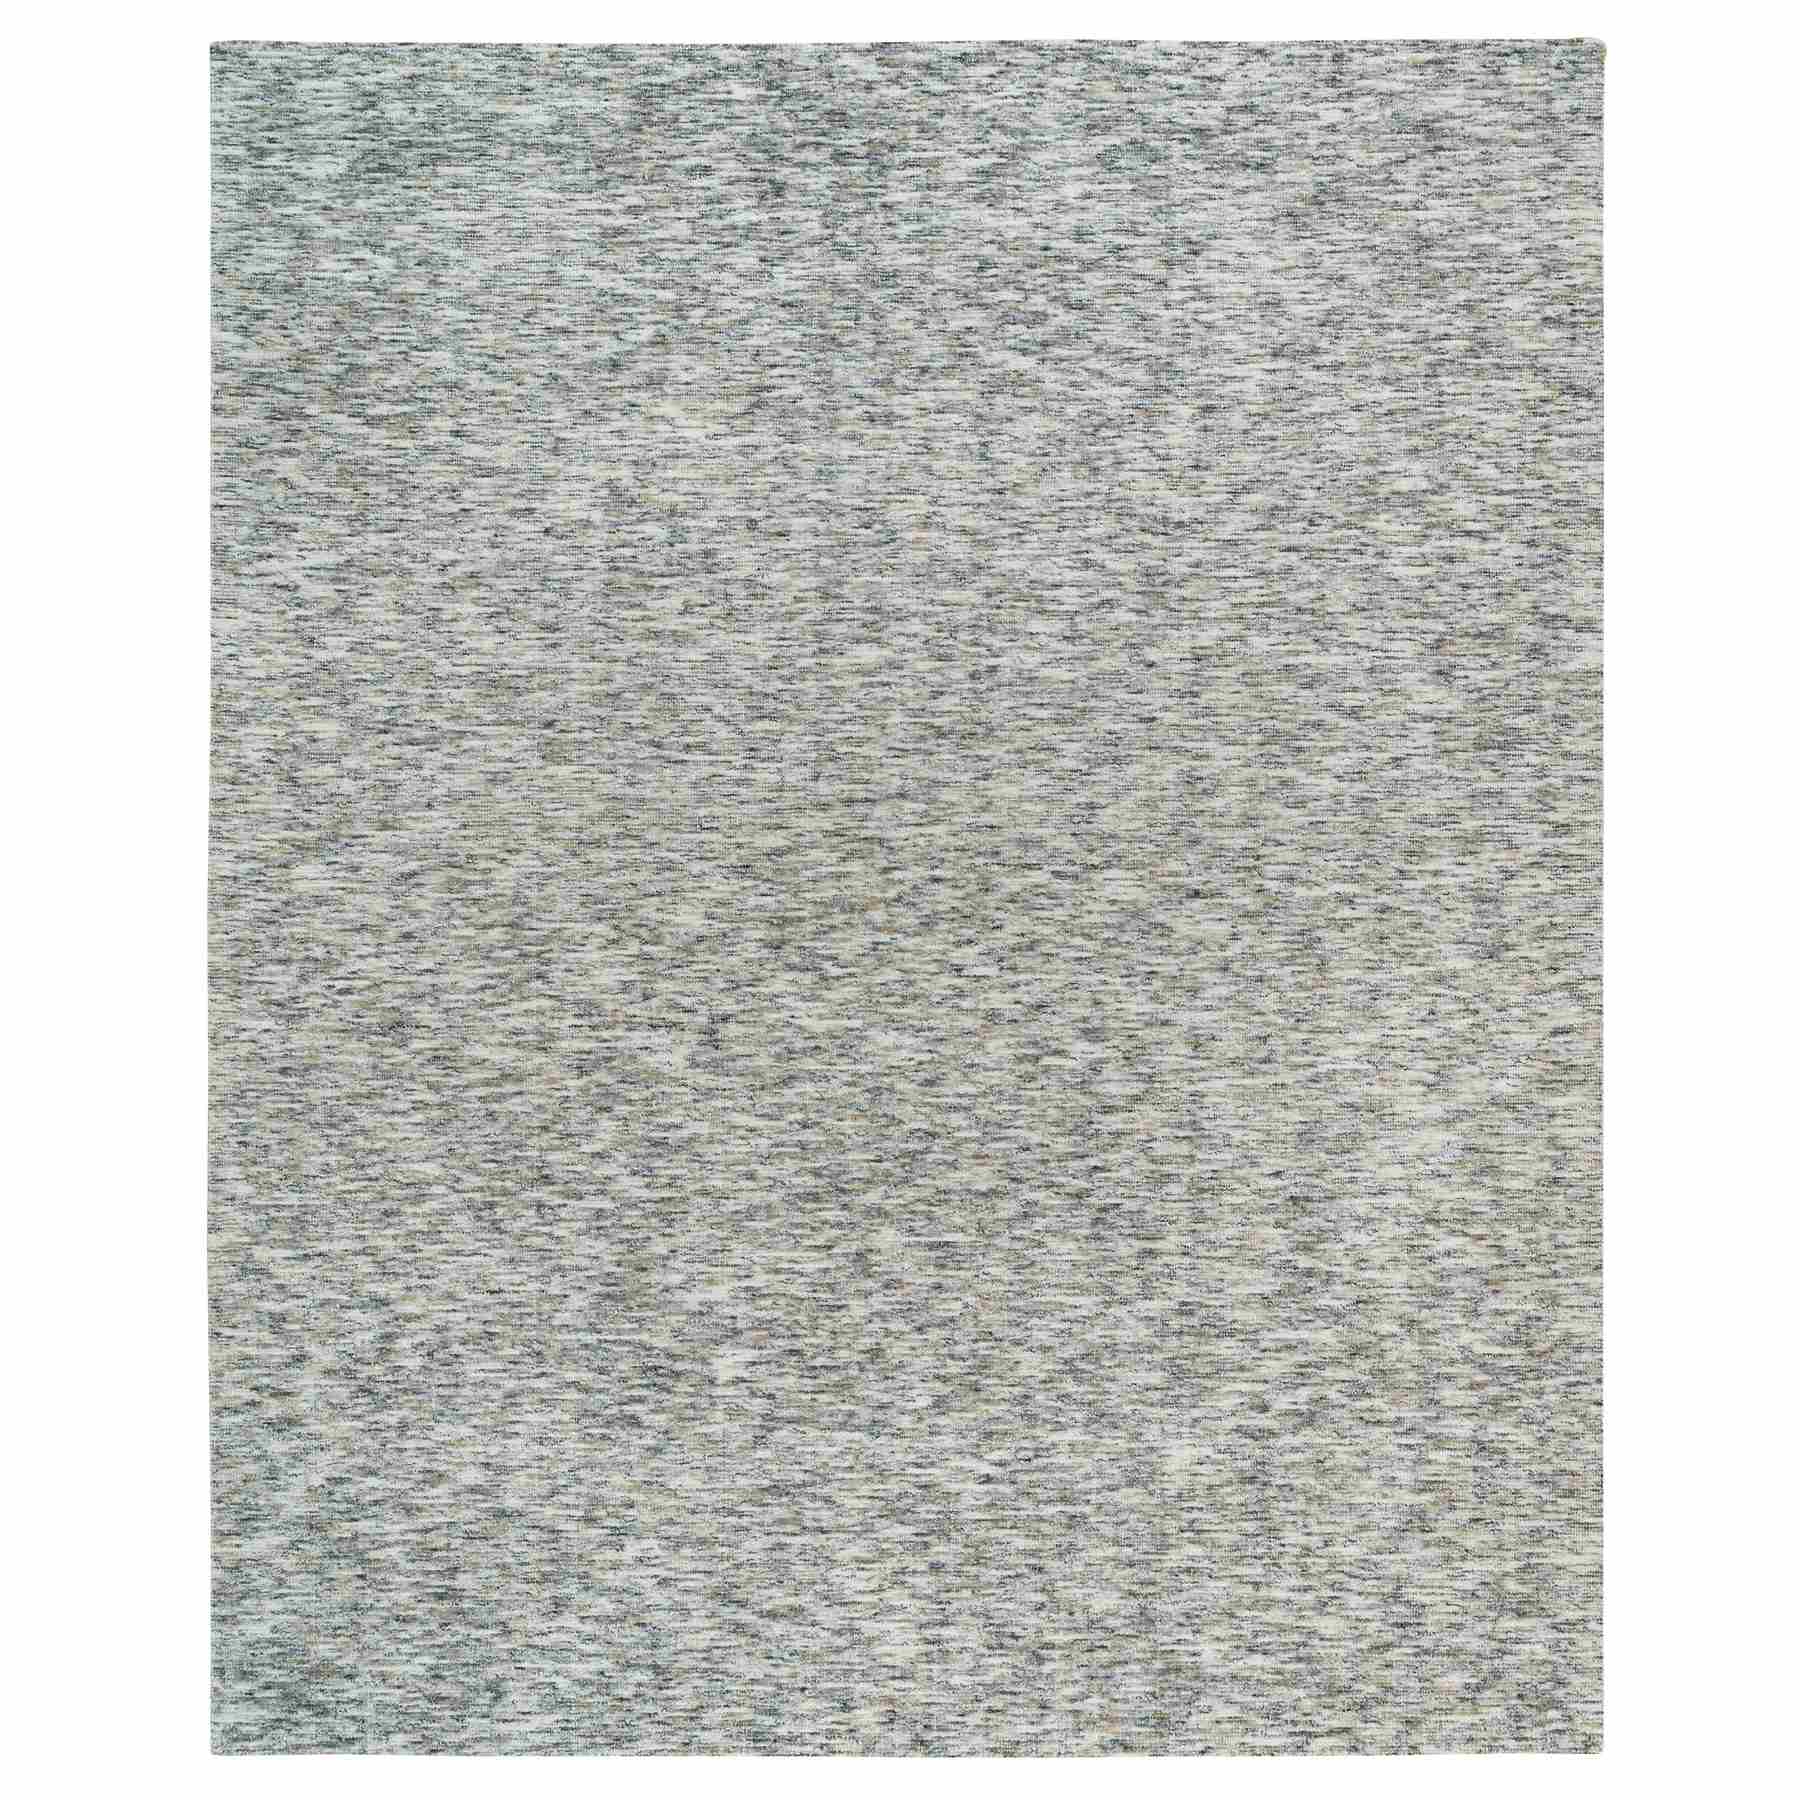 Earth Tone Colors, Modern Striae Design, Soft to the Touch, Pure Wool, Hand Loomed, Oversized Oriental 